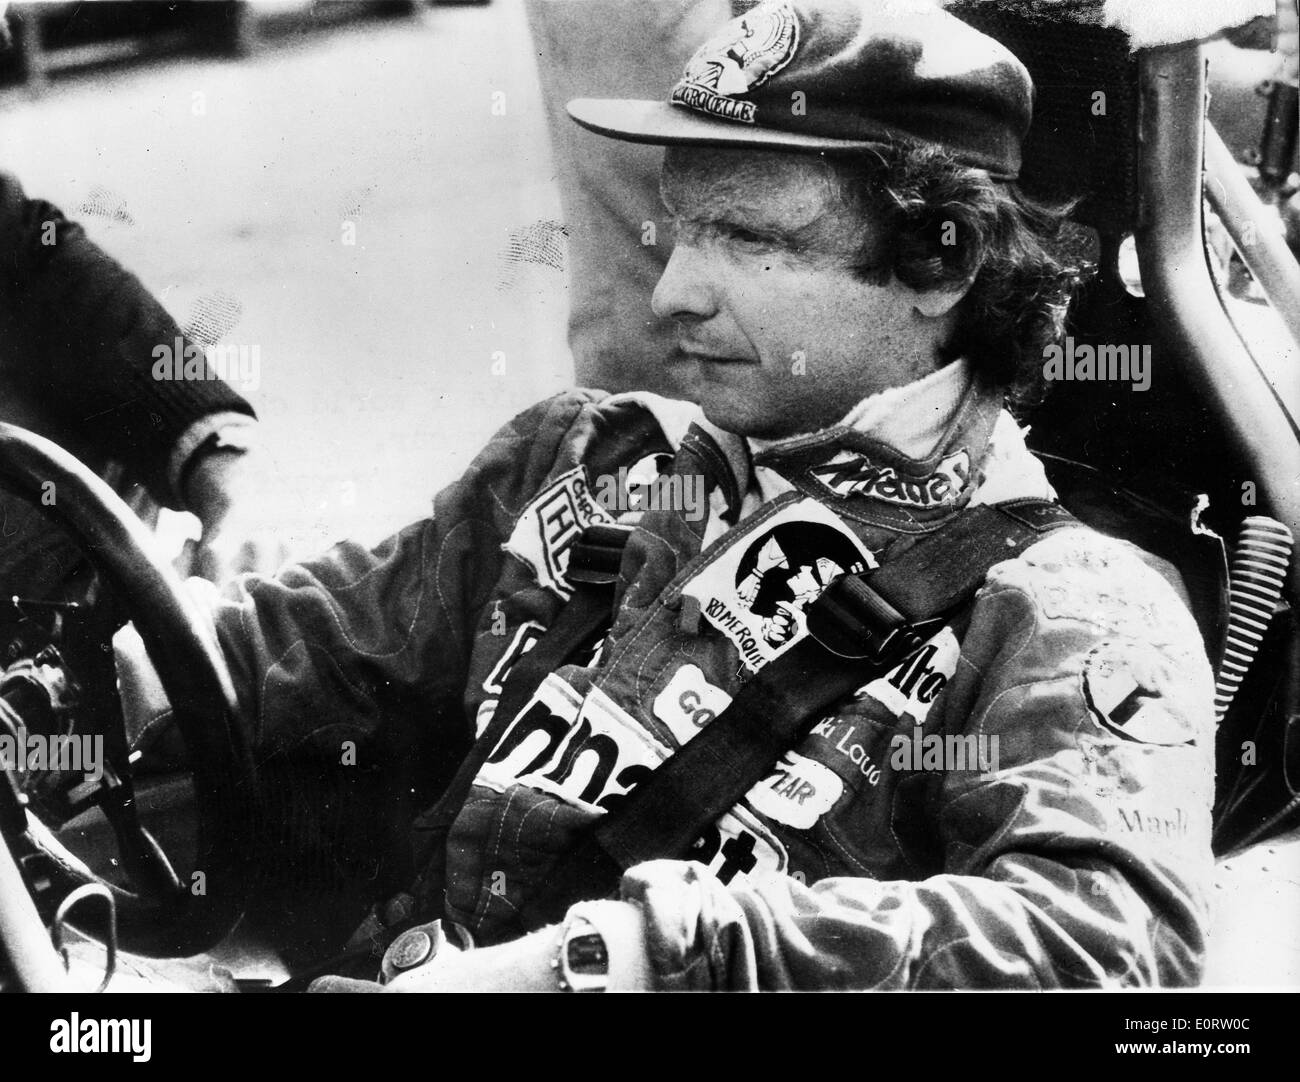 Niki Lauda High Resolution Stock Photography and Images - Alamy